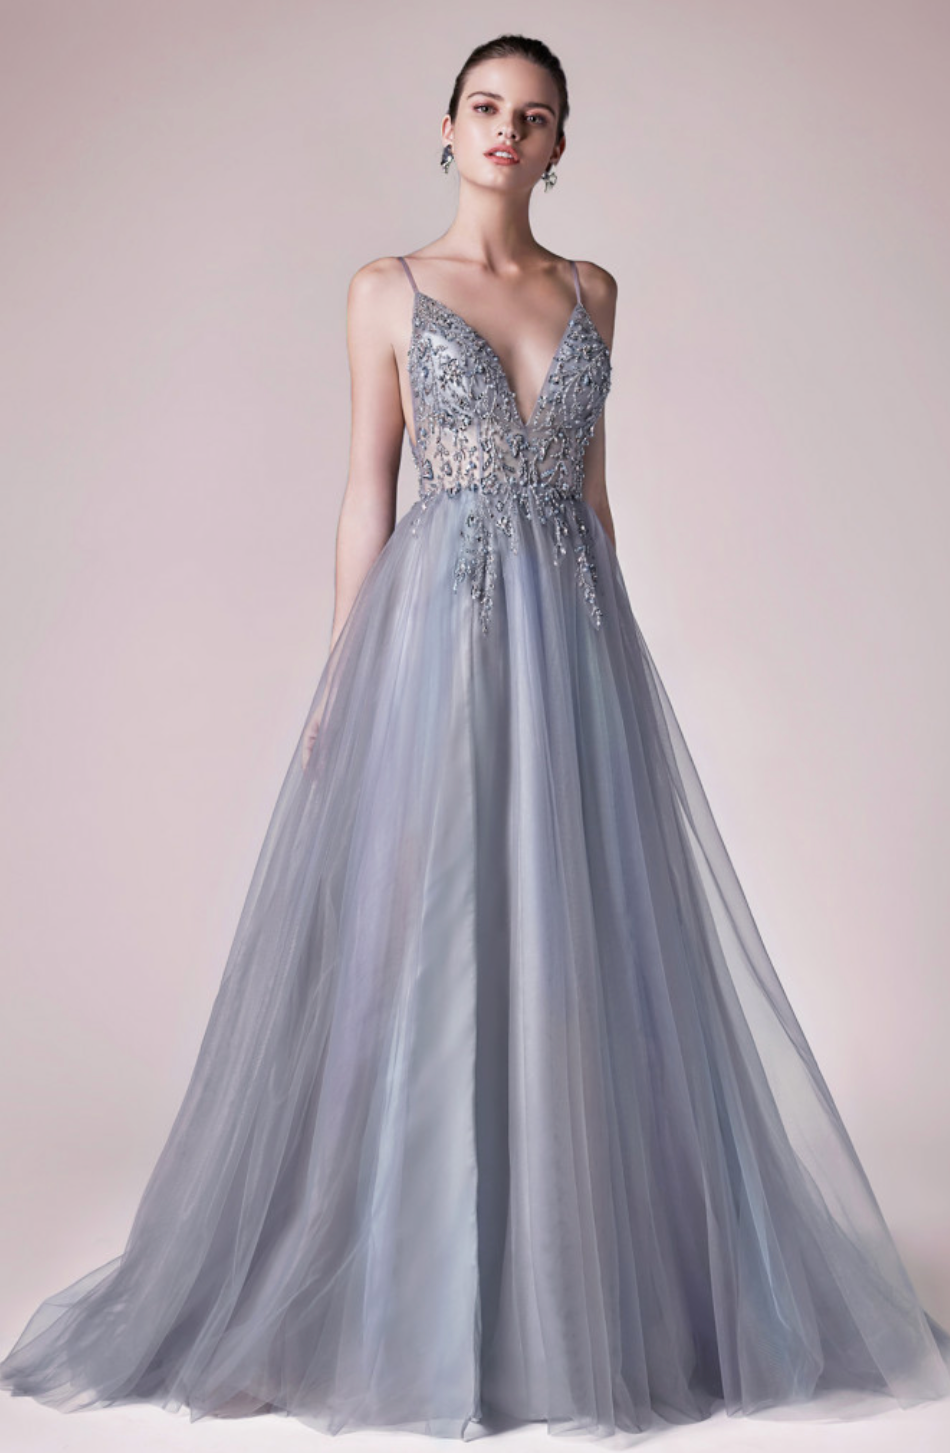 OPHELIA GOWN